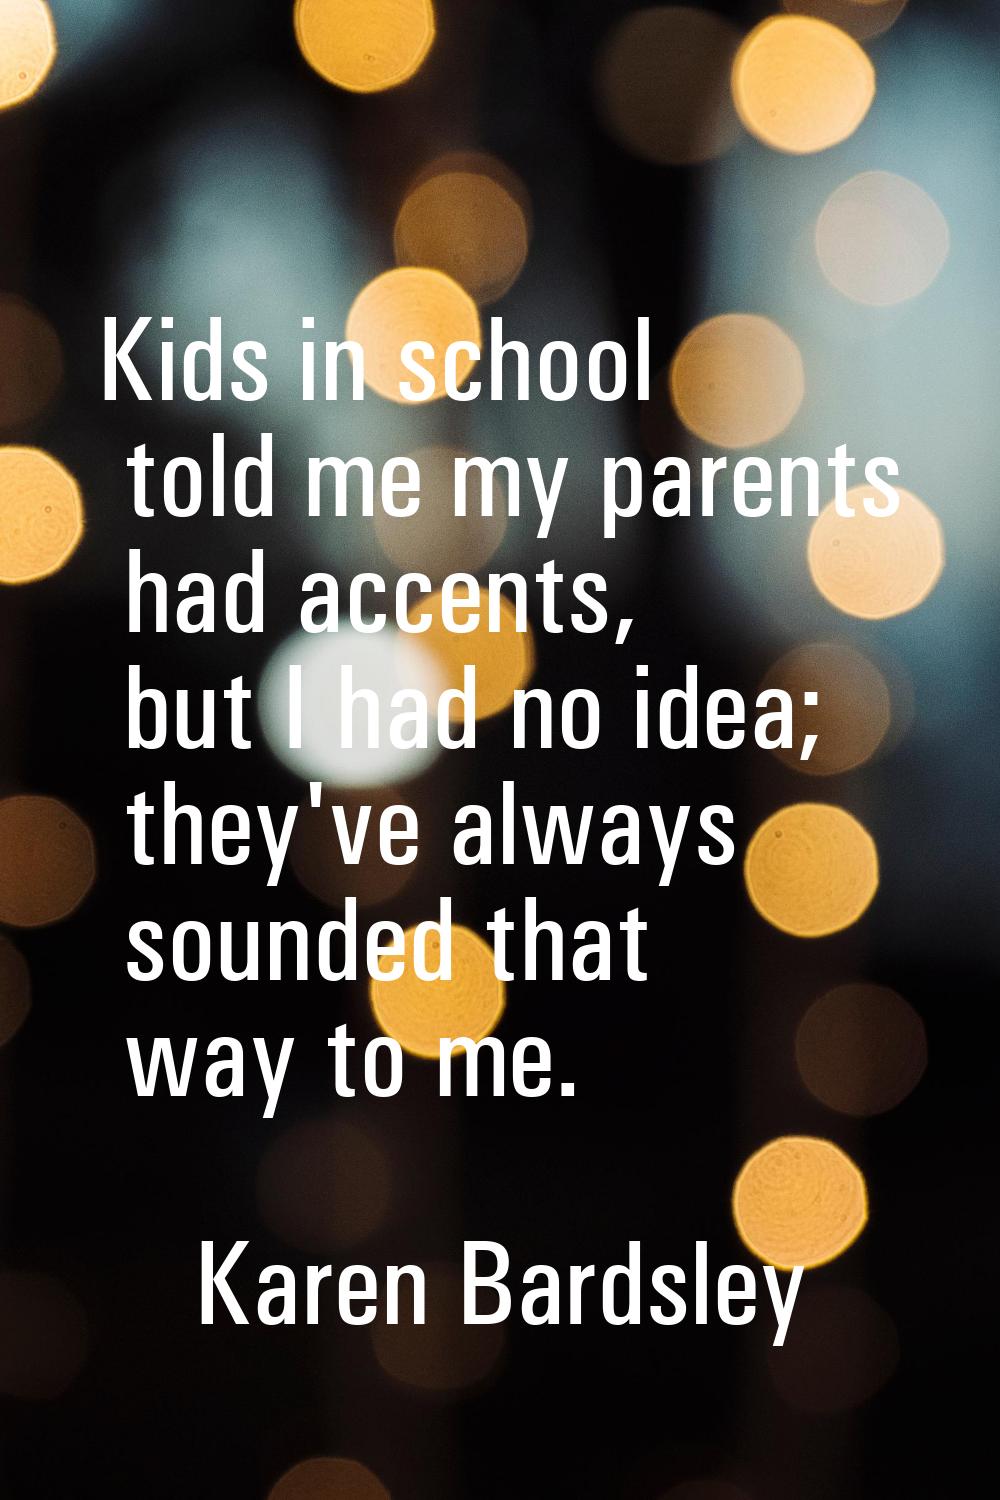 Kids in school told me my parents had accents, but I had no idea; they've always sounded that way t